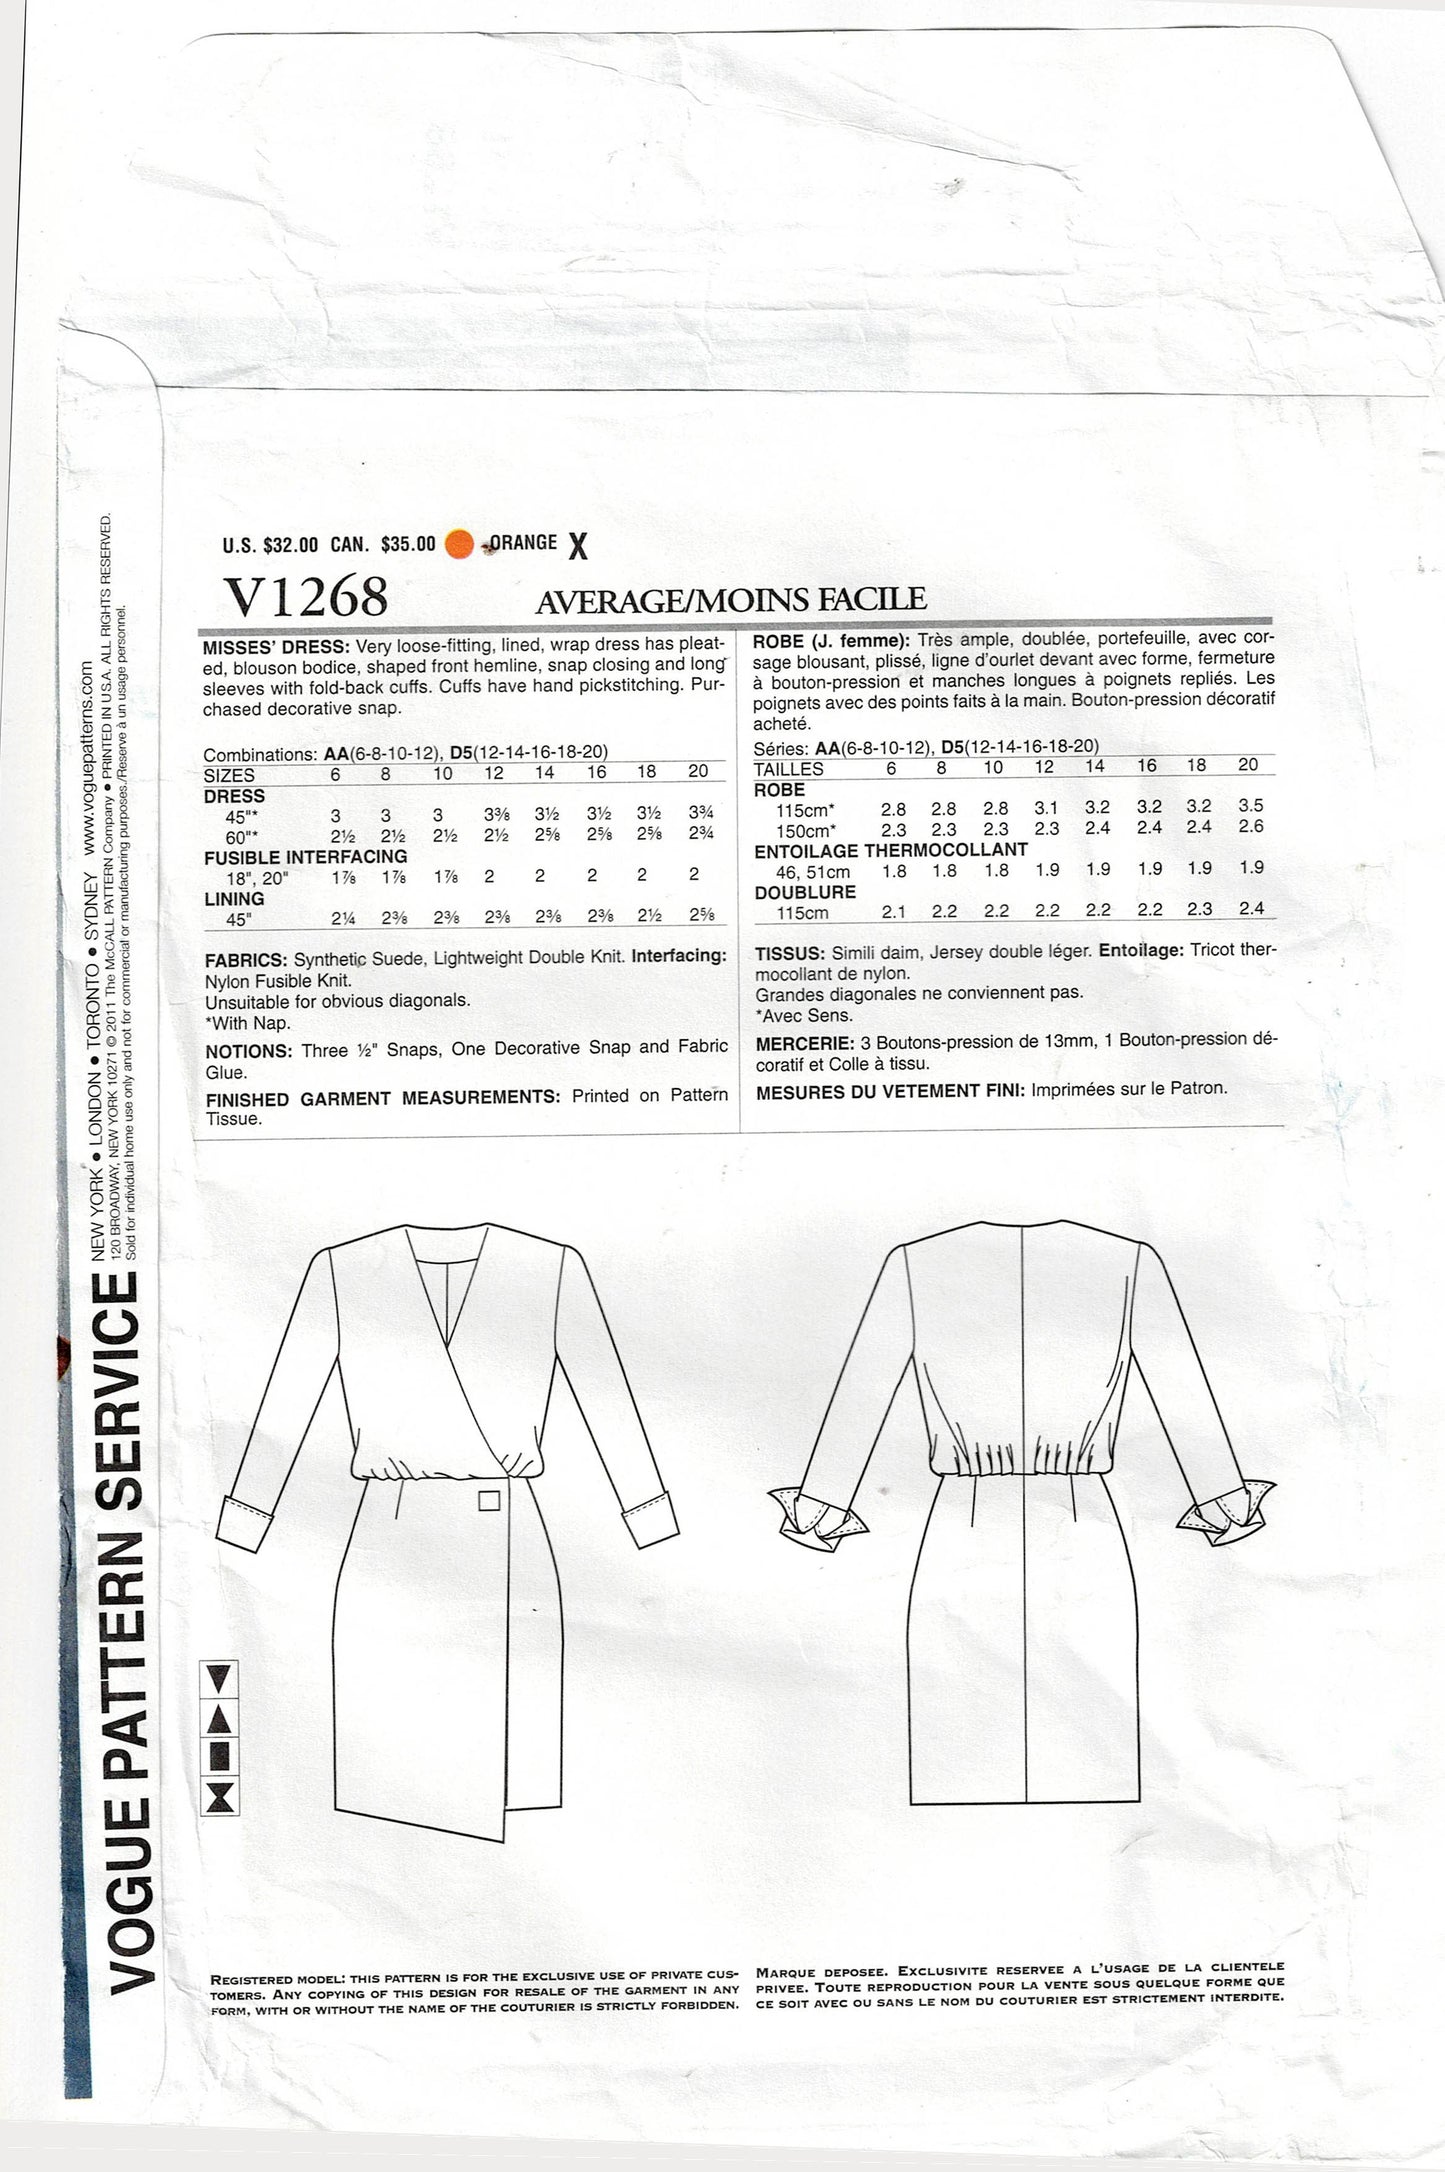 Vogue Paris Original 1268 GUY LAROCHE Womens Wrap Dress with Wide Cuffs Out Of Print Sewing Pattern Size 12 - 20 UNCUT Factory Folded